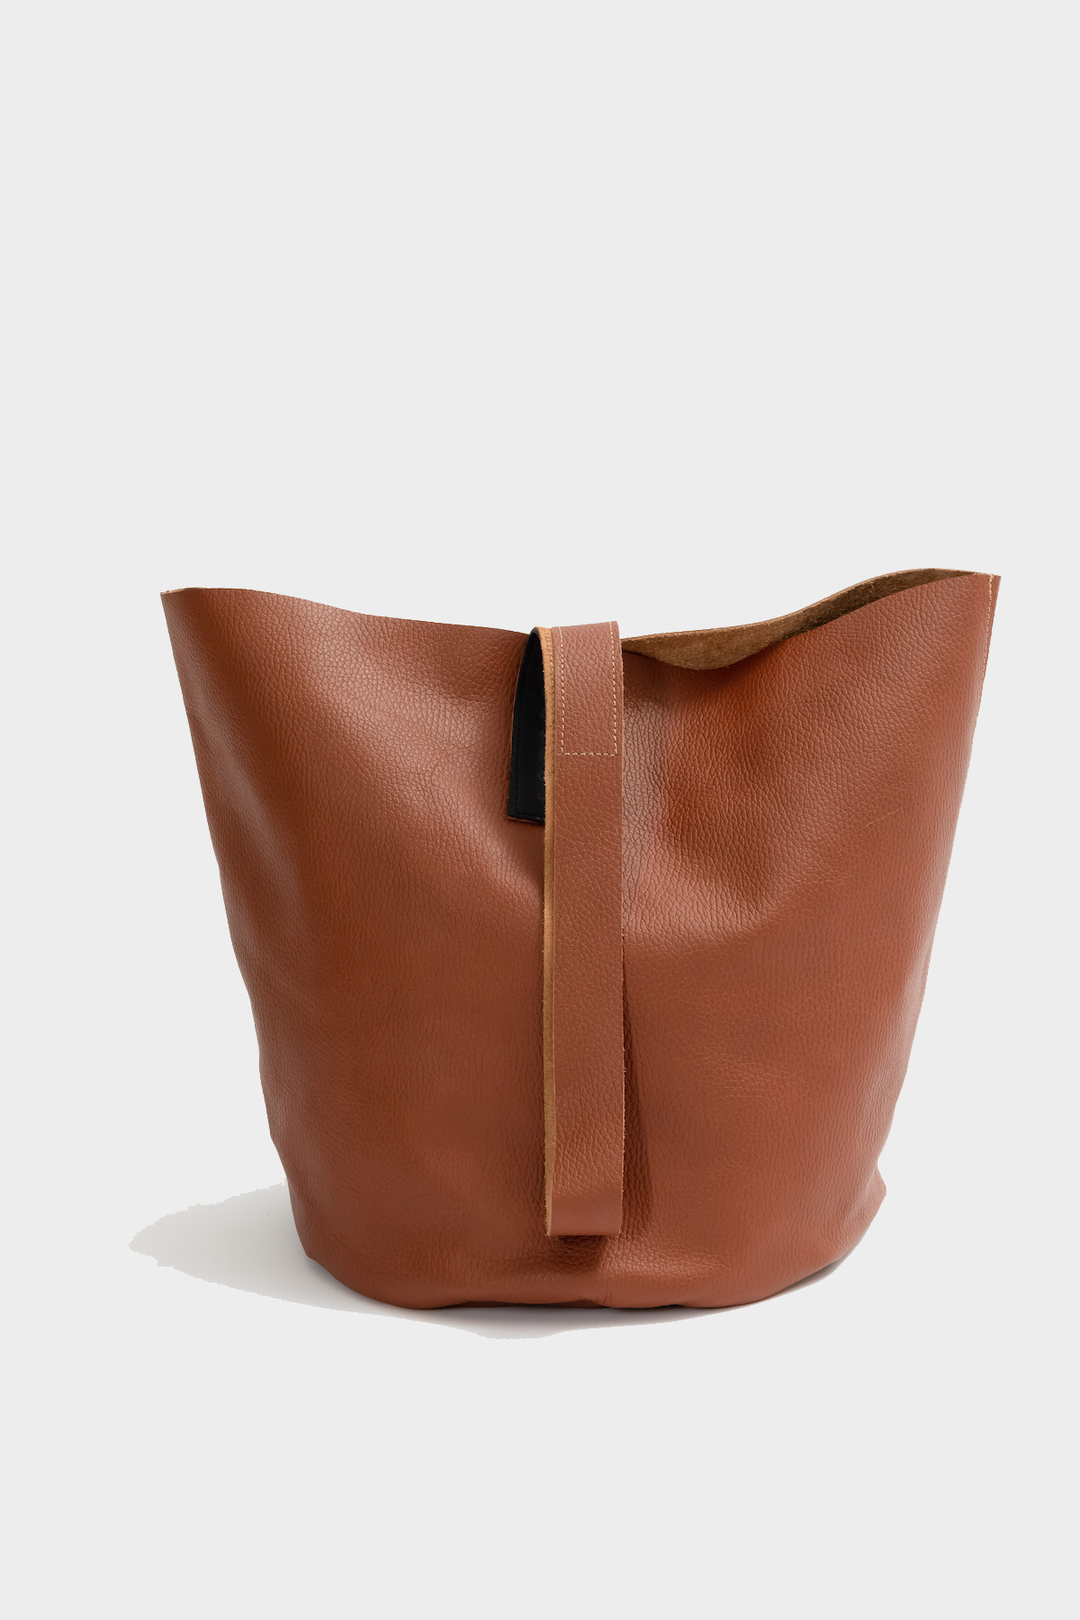 Hand Matters. Handcrafted leather bag